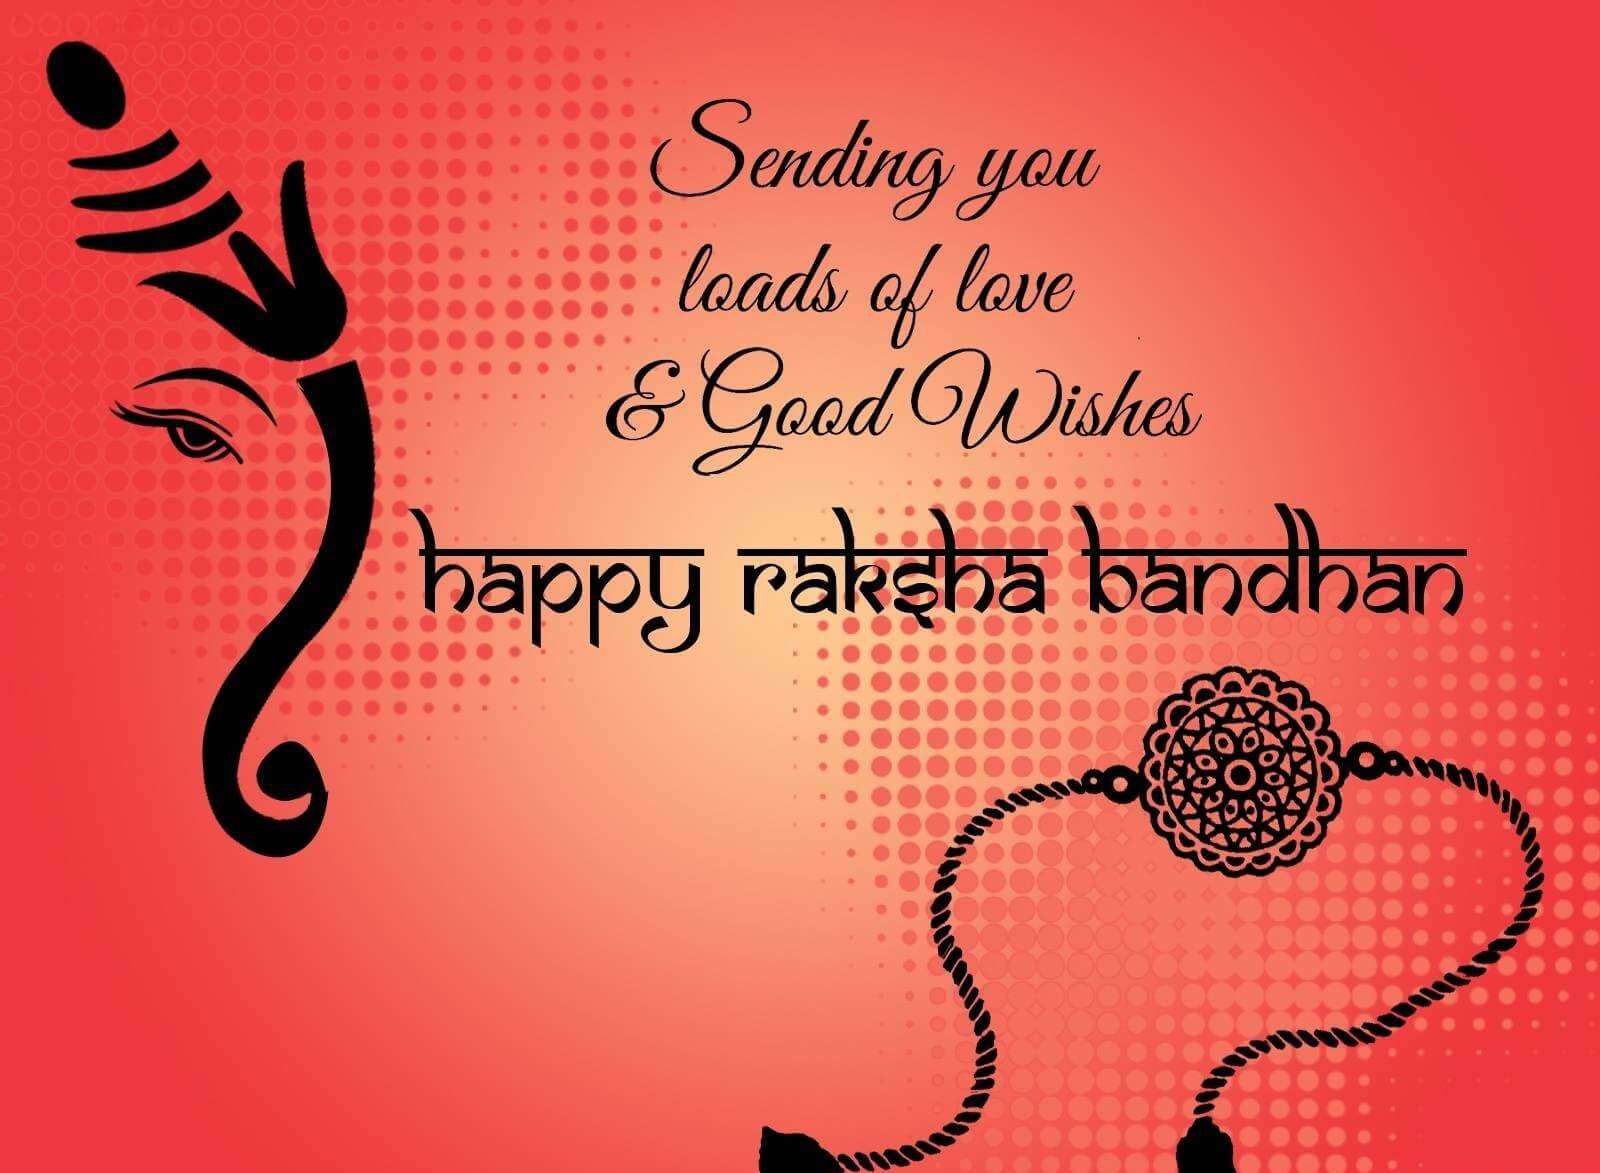 happy Rakhi wishes wallpapers images hd download